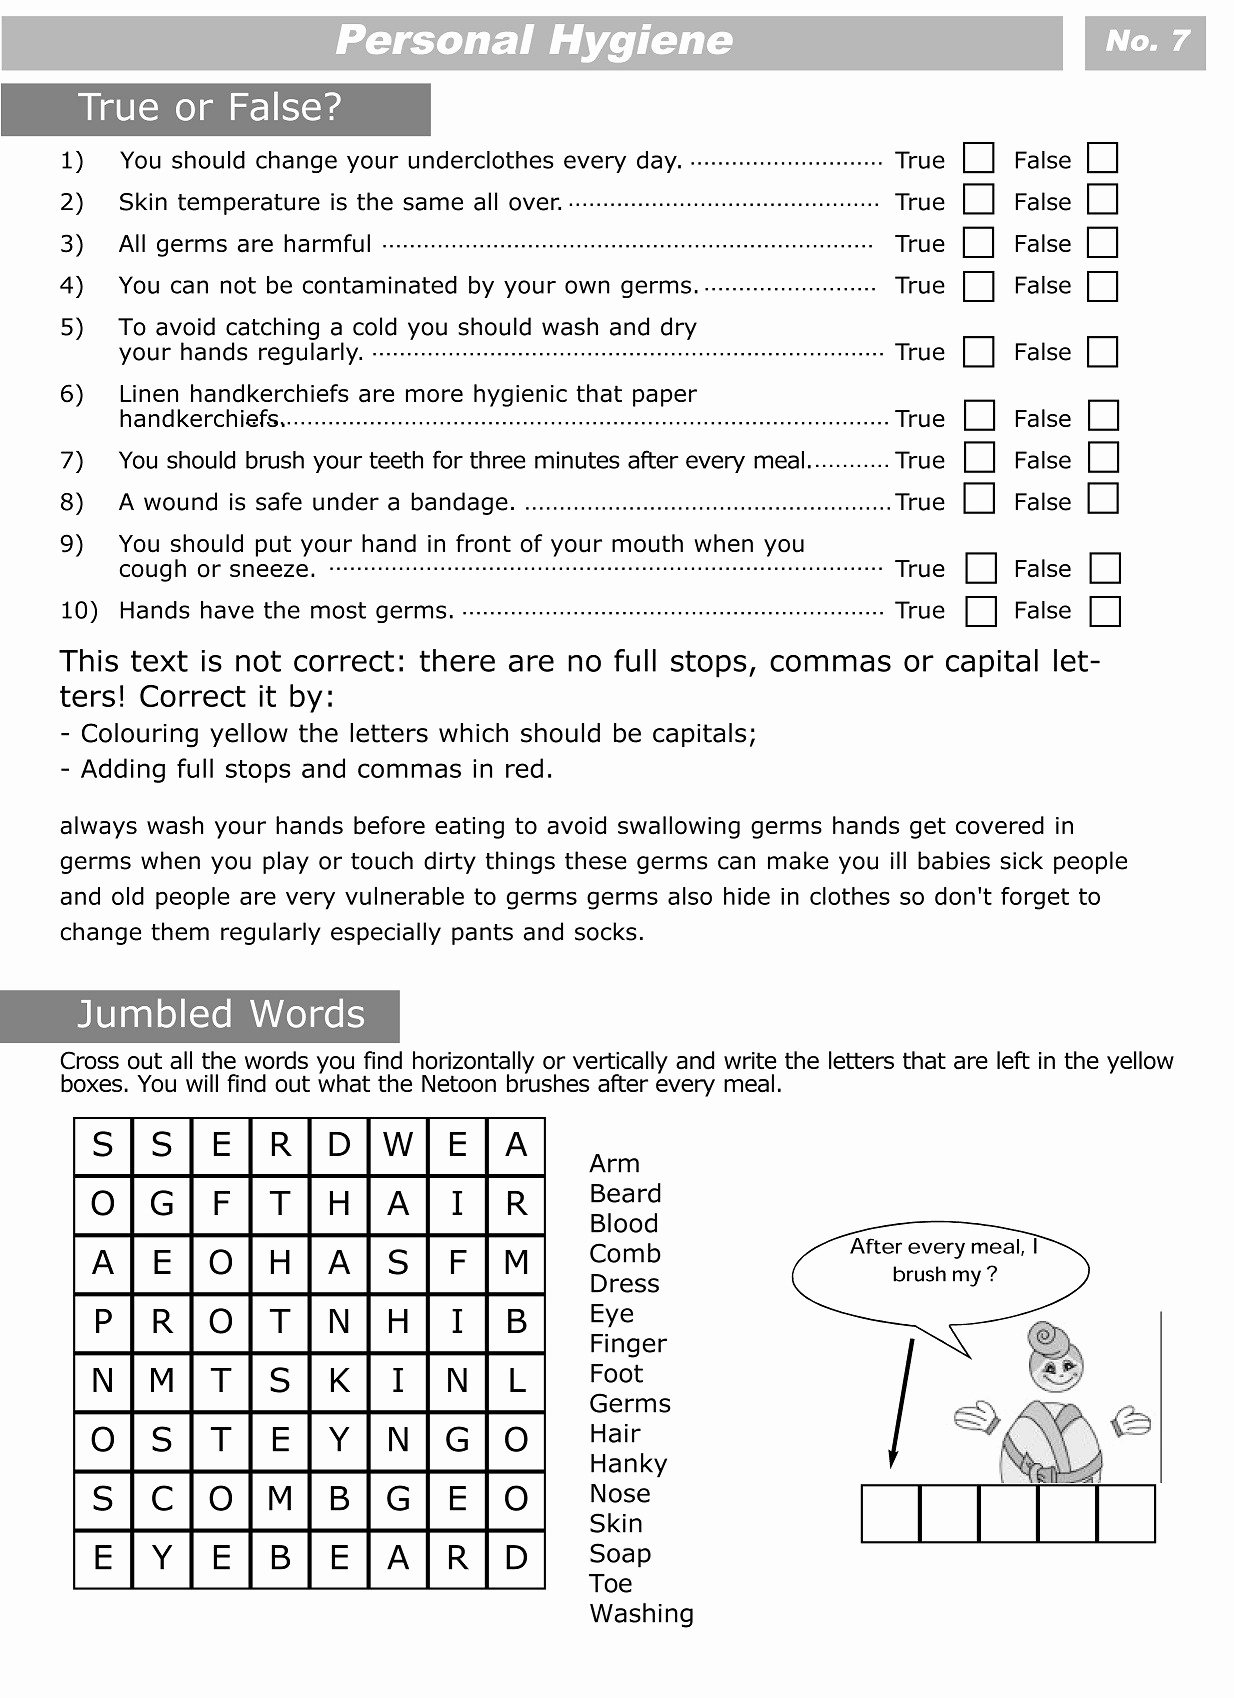 Middle School Health Worksheets Best Of Middle School Health Worksheets Pdf